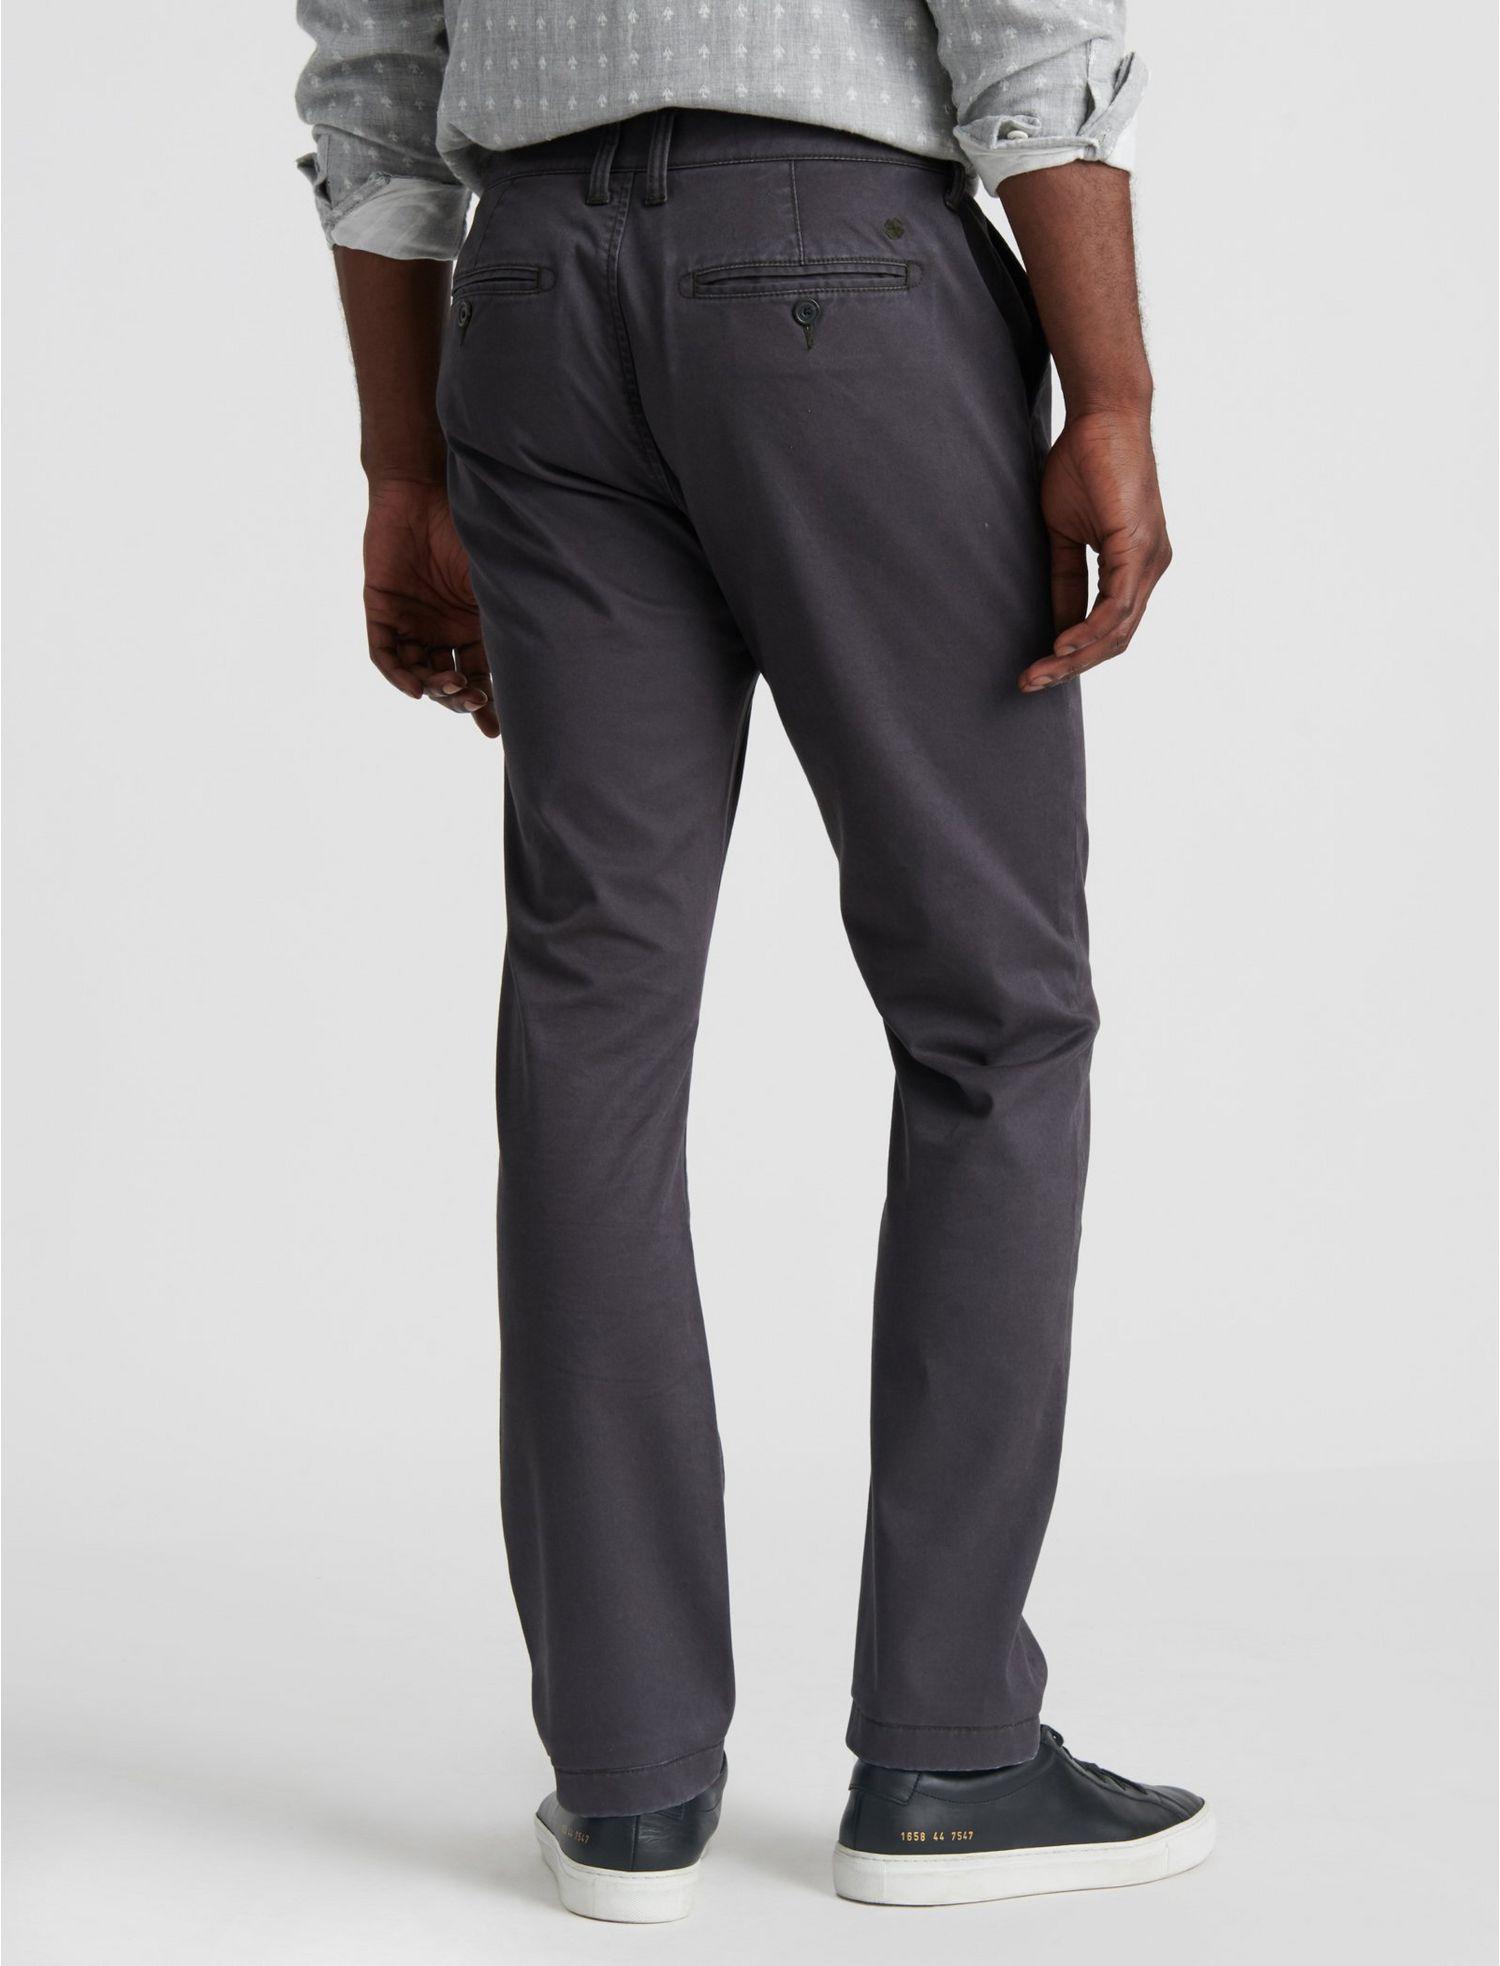 Lucky Brand 410 Coolmax Stretch Chino Pant for Men - Lyst